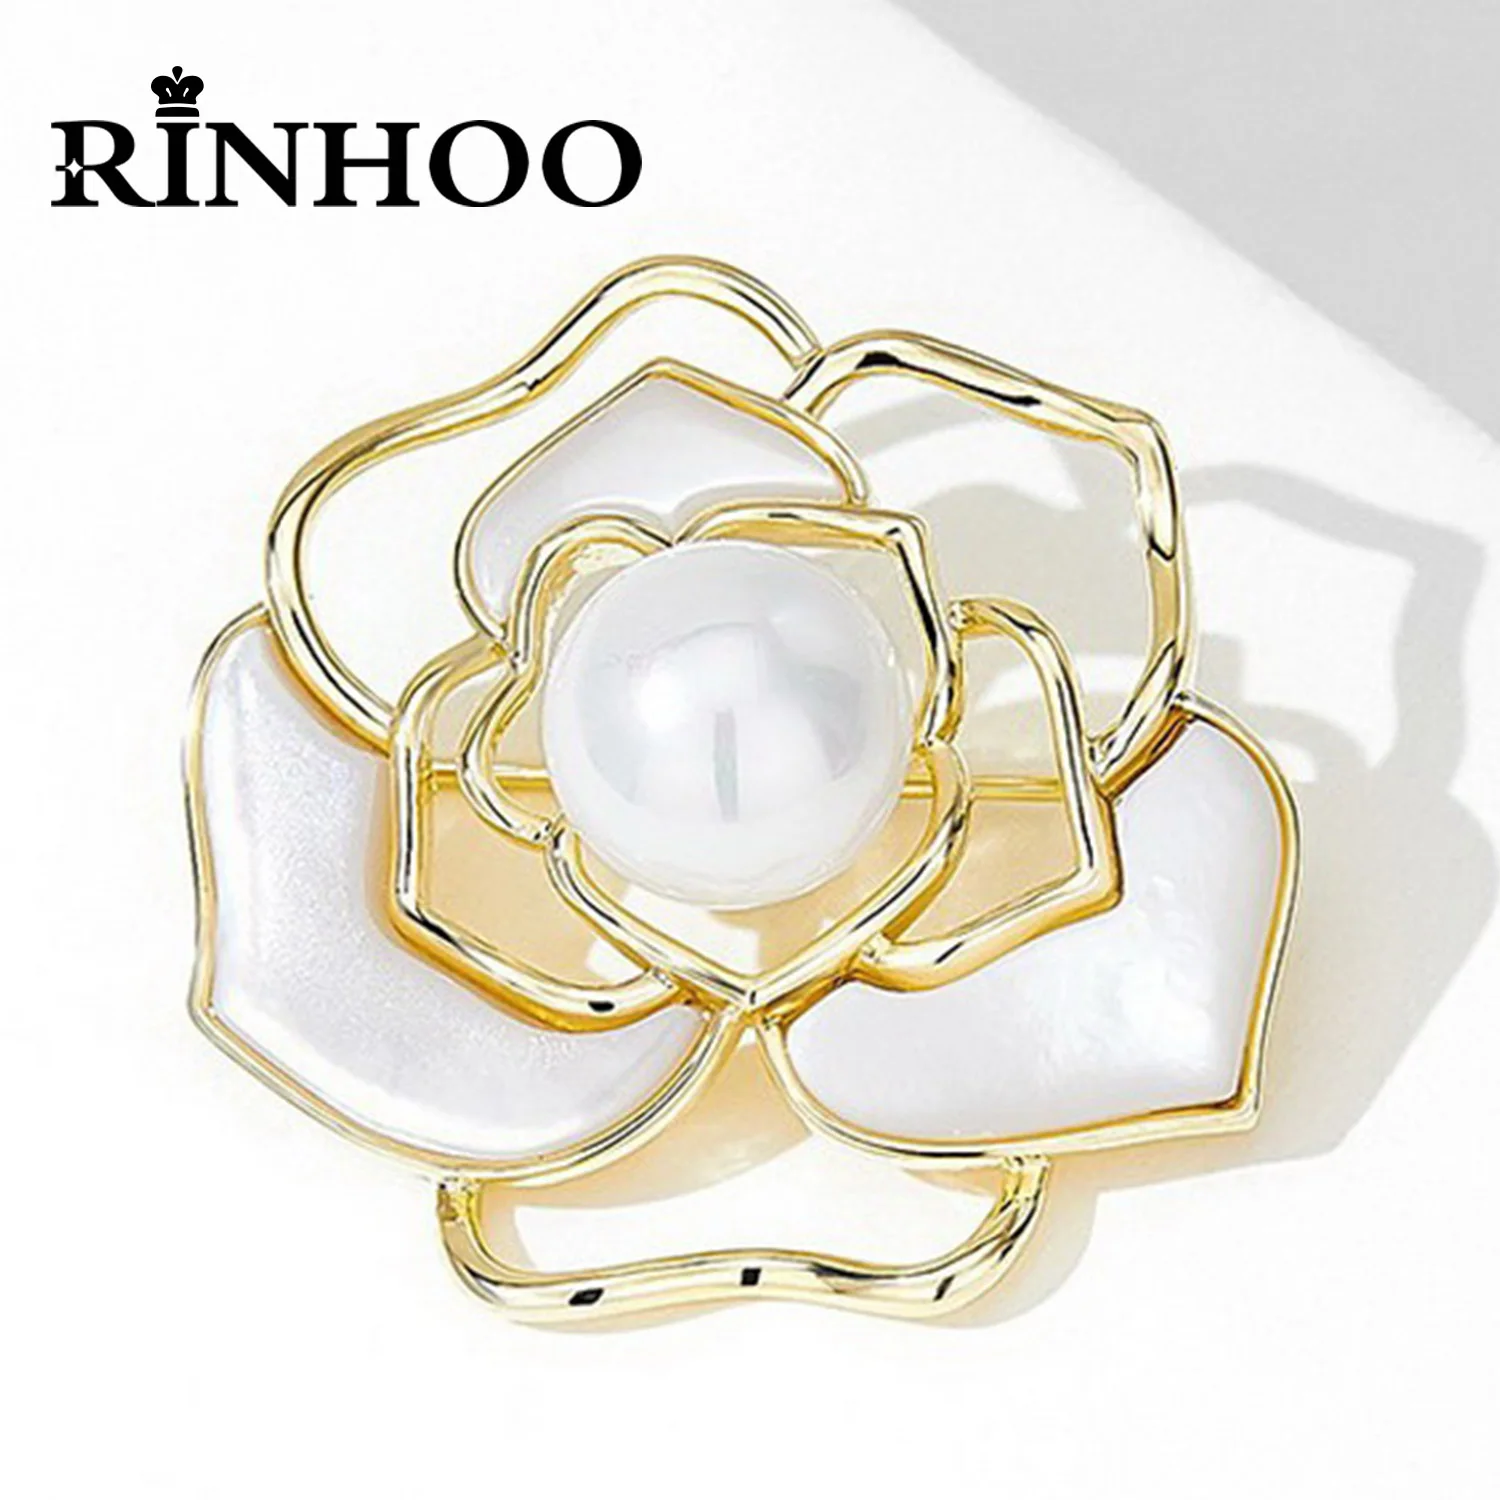 

Rinhoo Imitation Pearl Shell Rose Flower Brooches For Women Girls Elegant Floral Petal Bouquet Lapel Pins Wedding Party Jewelry